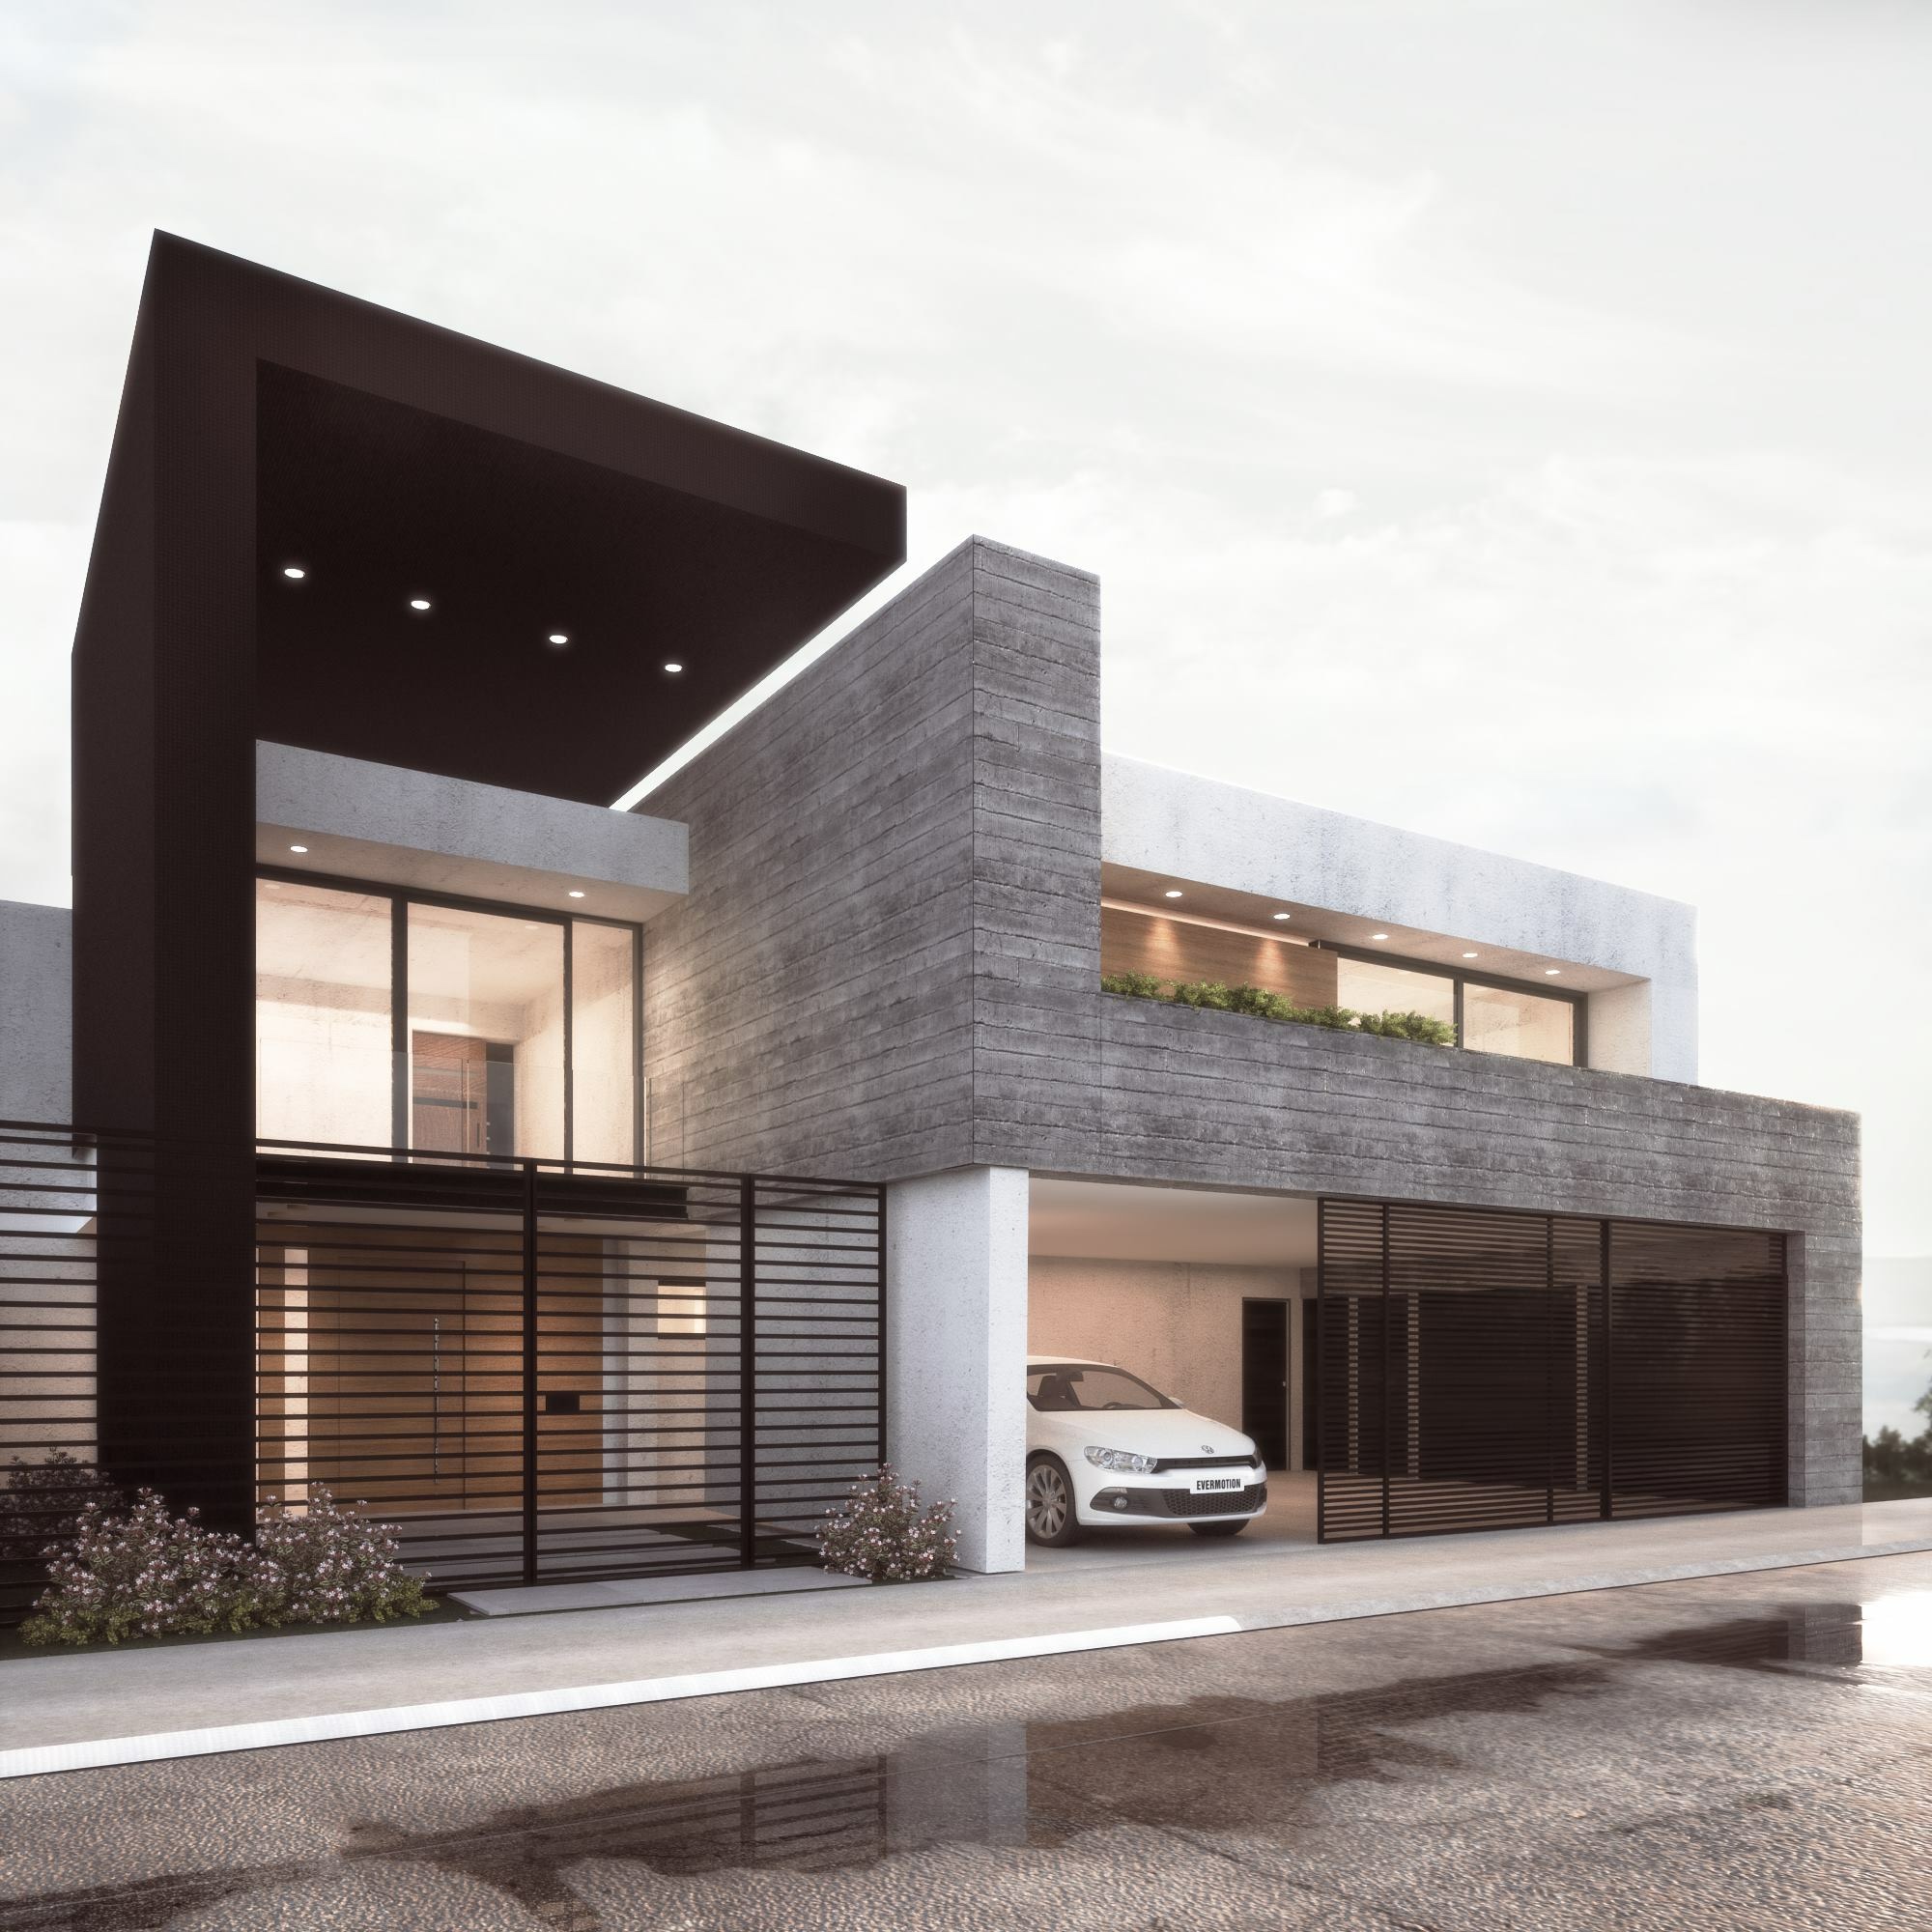 vray settings for exterior rendering sketchup